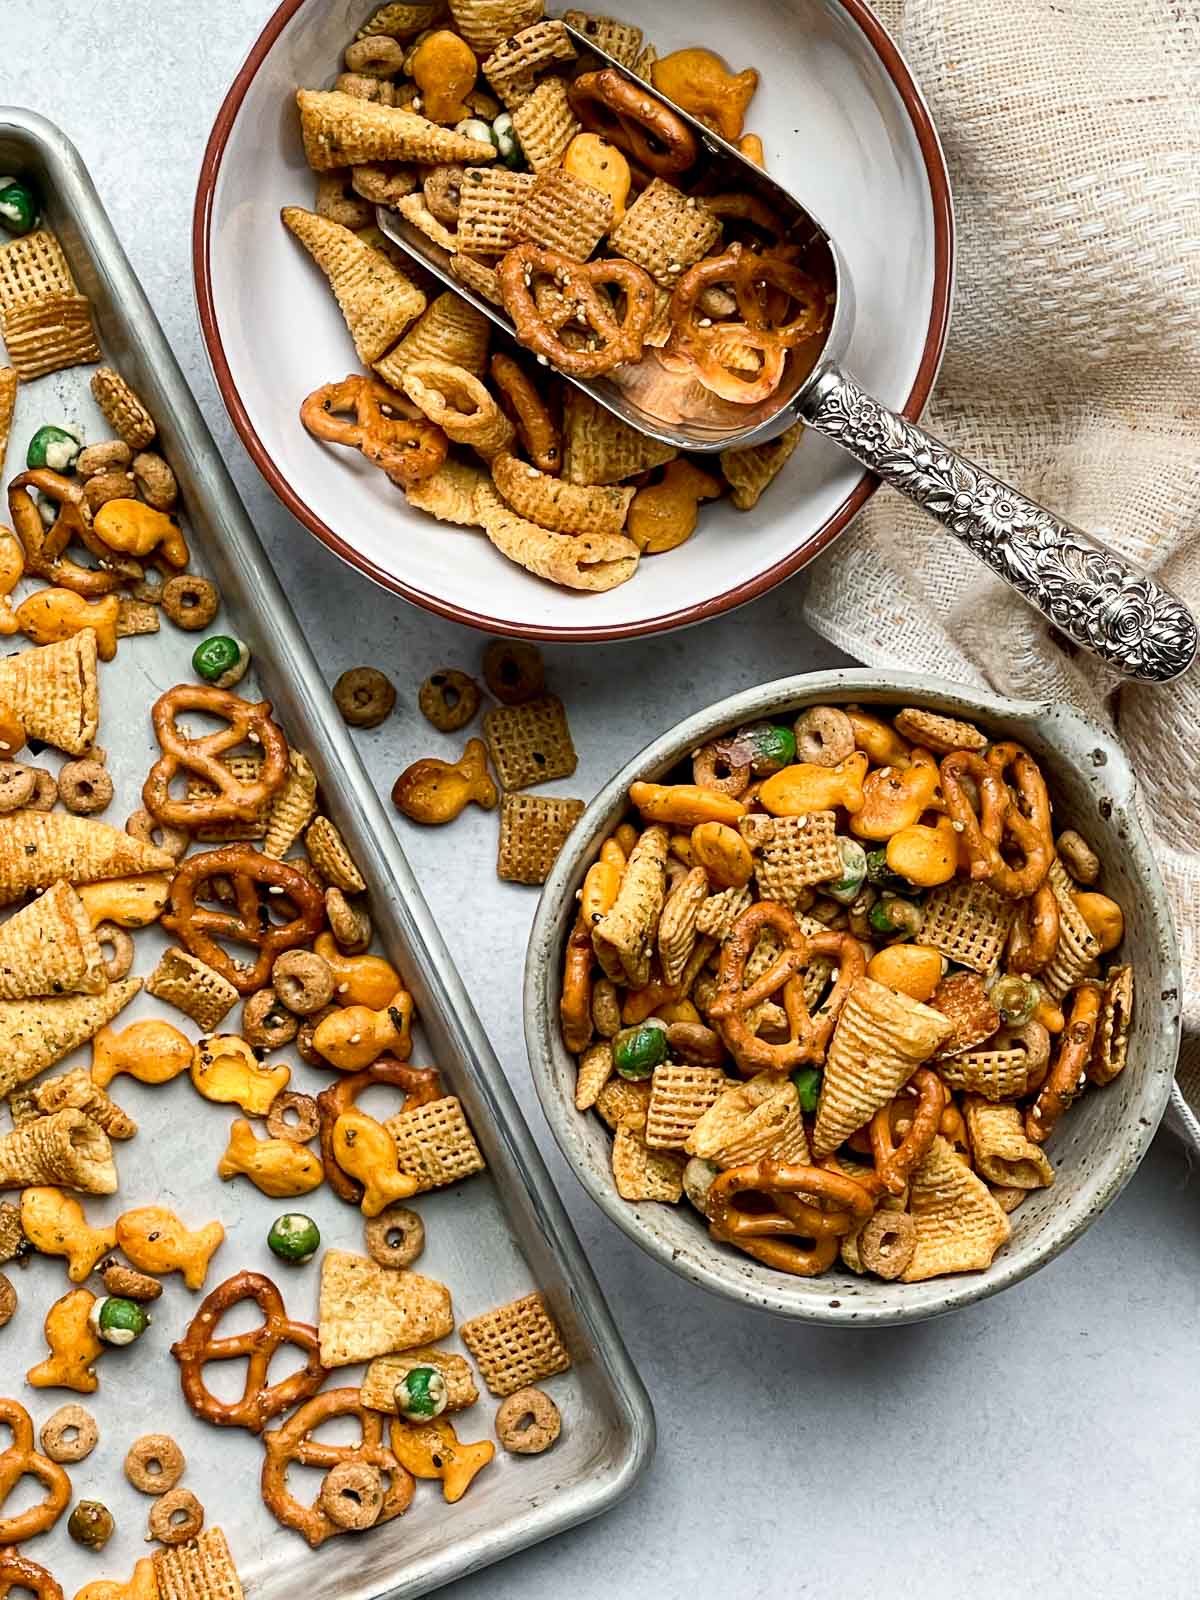 Two bowls of Furikake Chex Mix, one with a silver scoop, on a gray surface with a linen napkin and baking tray of Chex Mix on the side.